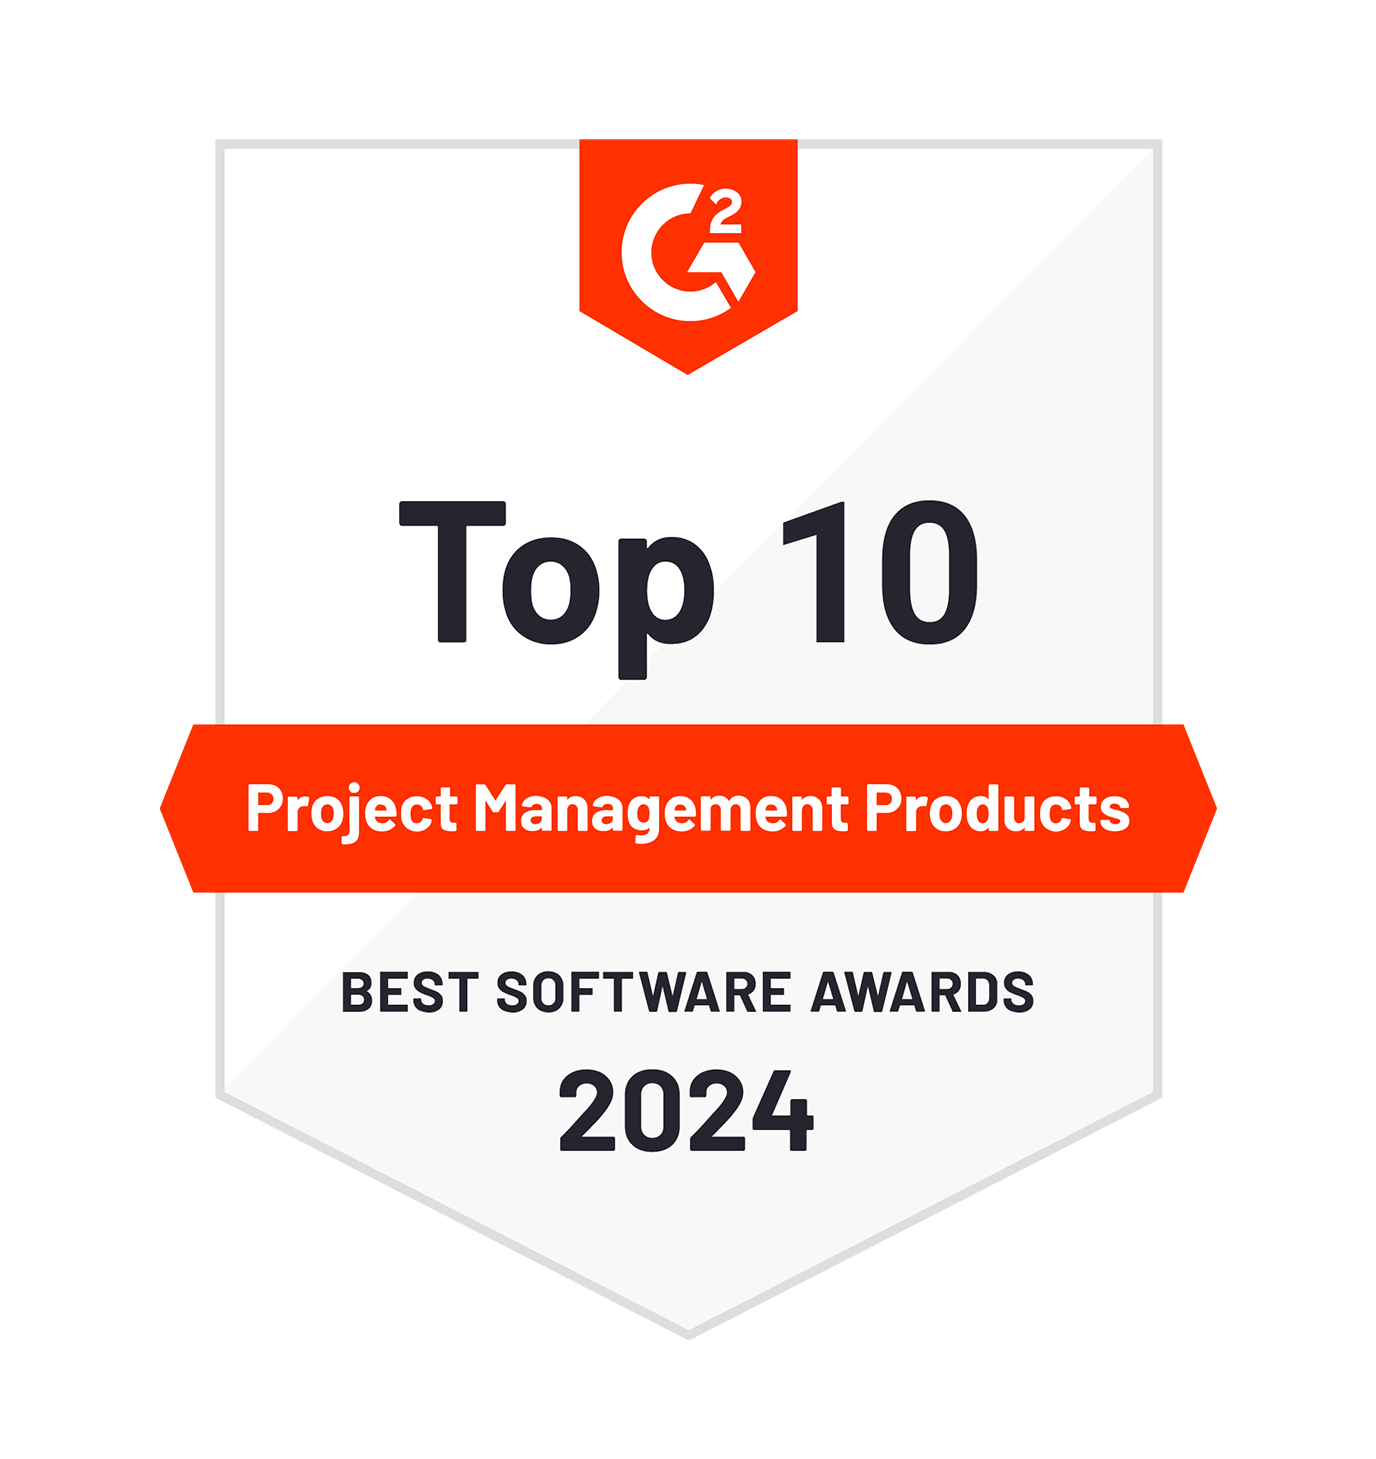 G2 Top 10 in Project Management Projects